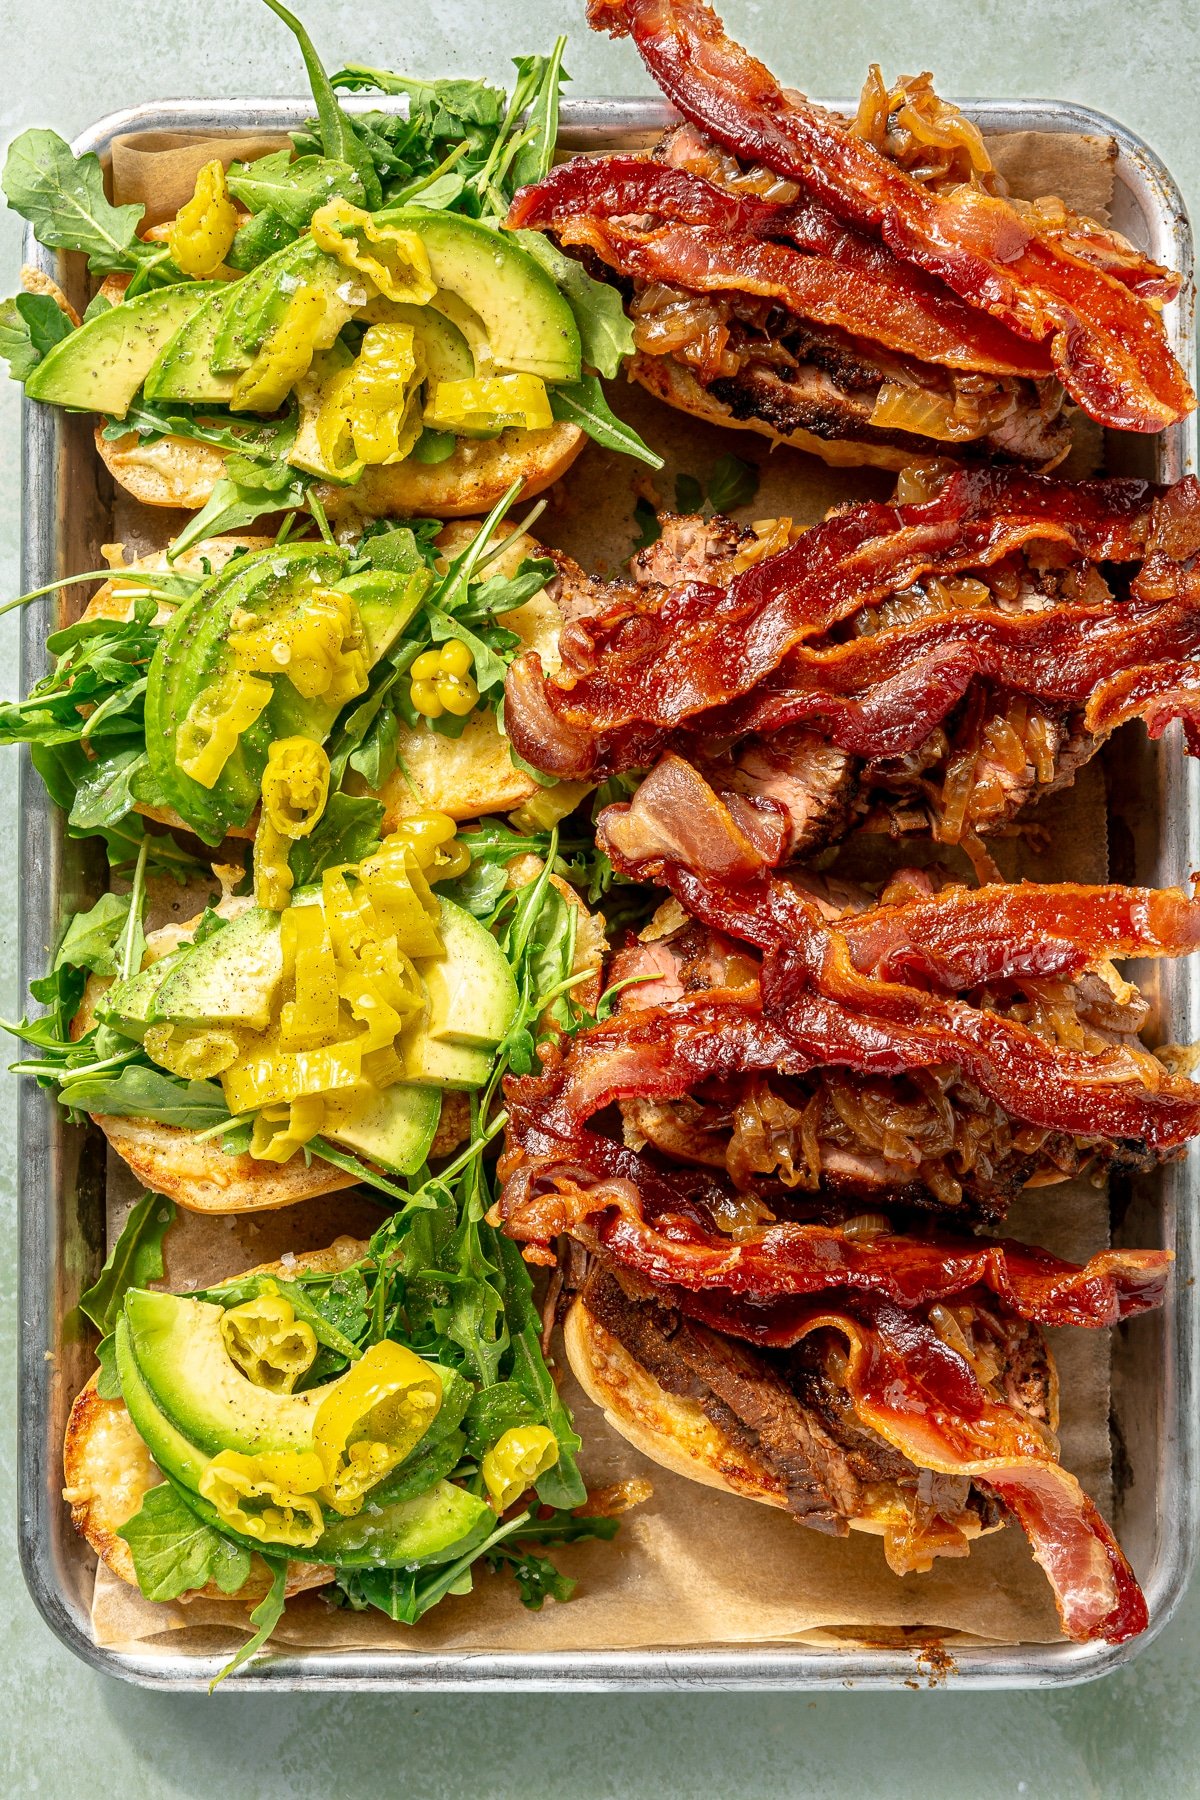 Sliced steak, bacon, caramelized onions, avocado slices, and pepperocinis have been placed on the toasted baguette halves.